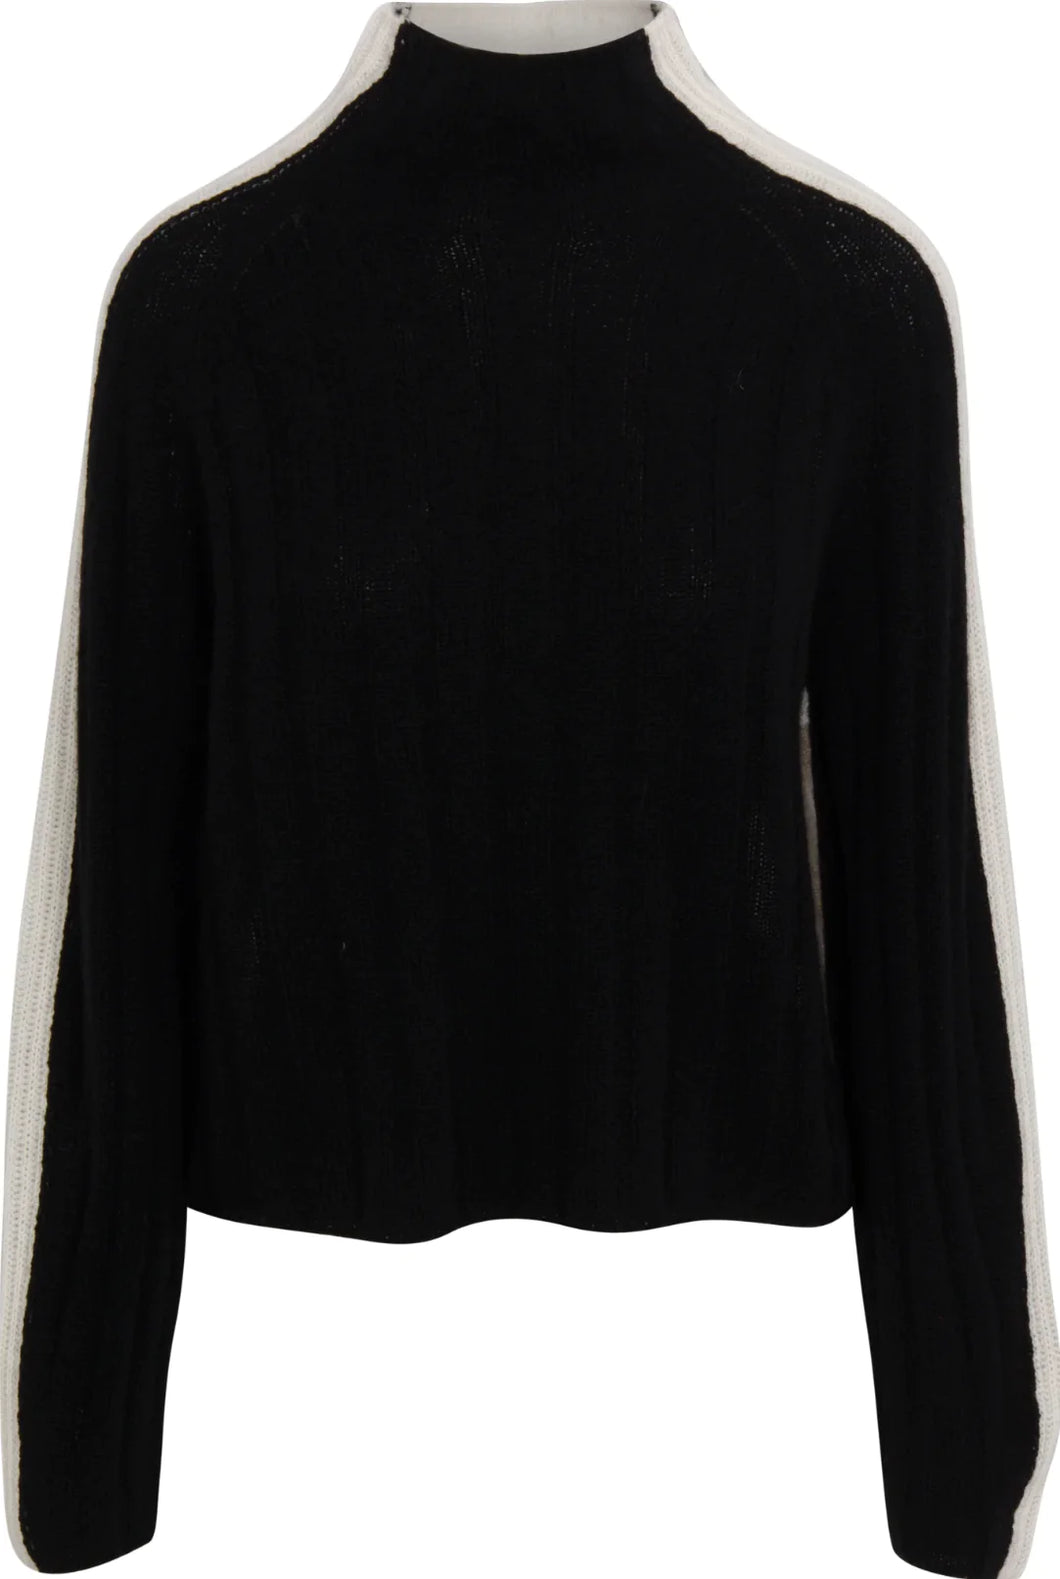 Jamie Sweater By 360 Cashmere!  50% Off!